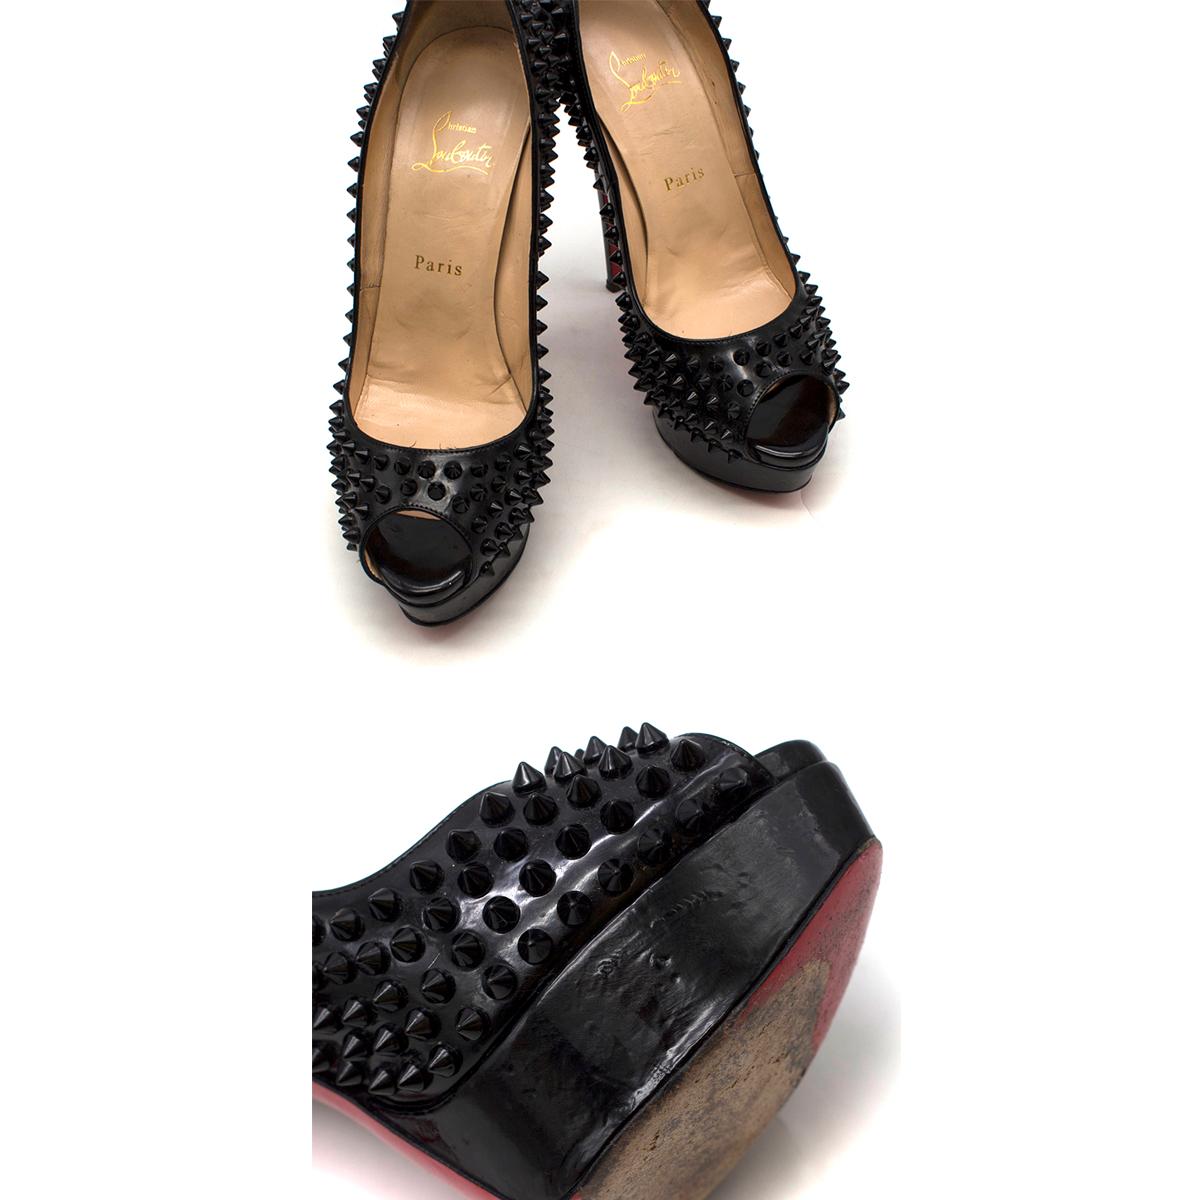 Christian Louboutin Lady Peep Spikes 145mm leather pumps US 8.5 1